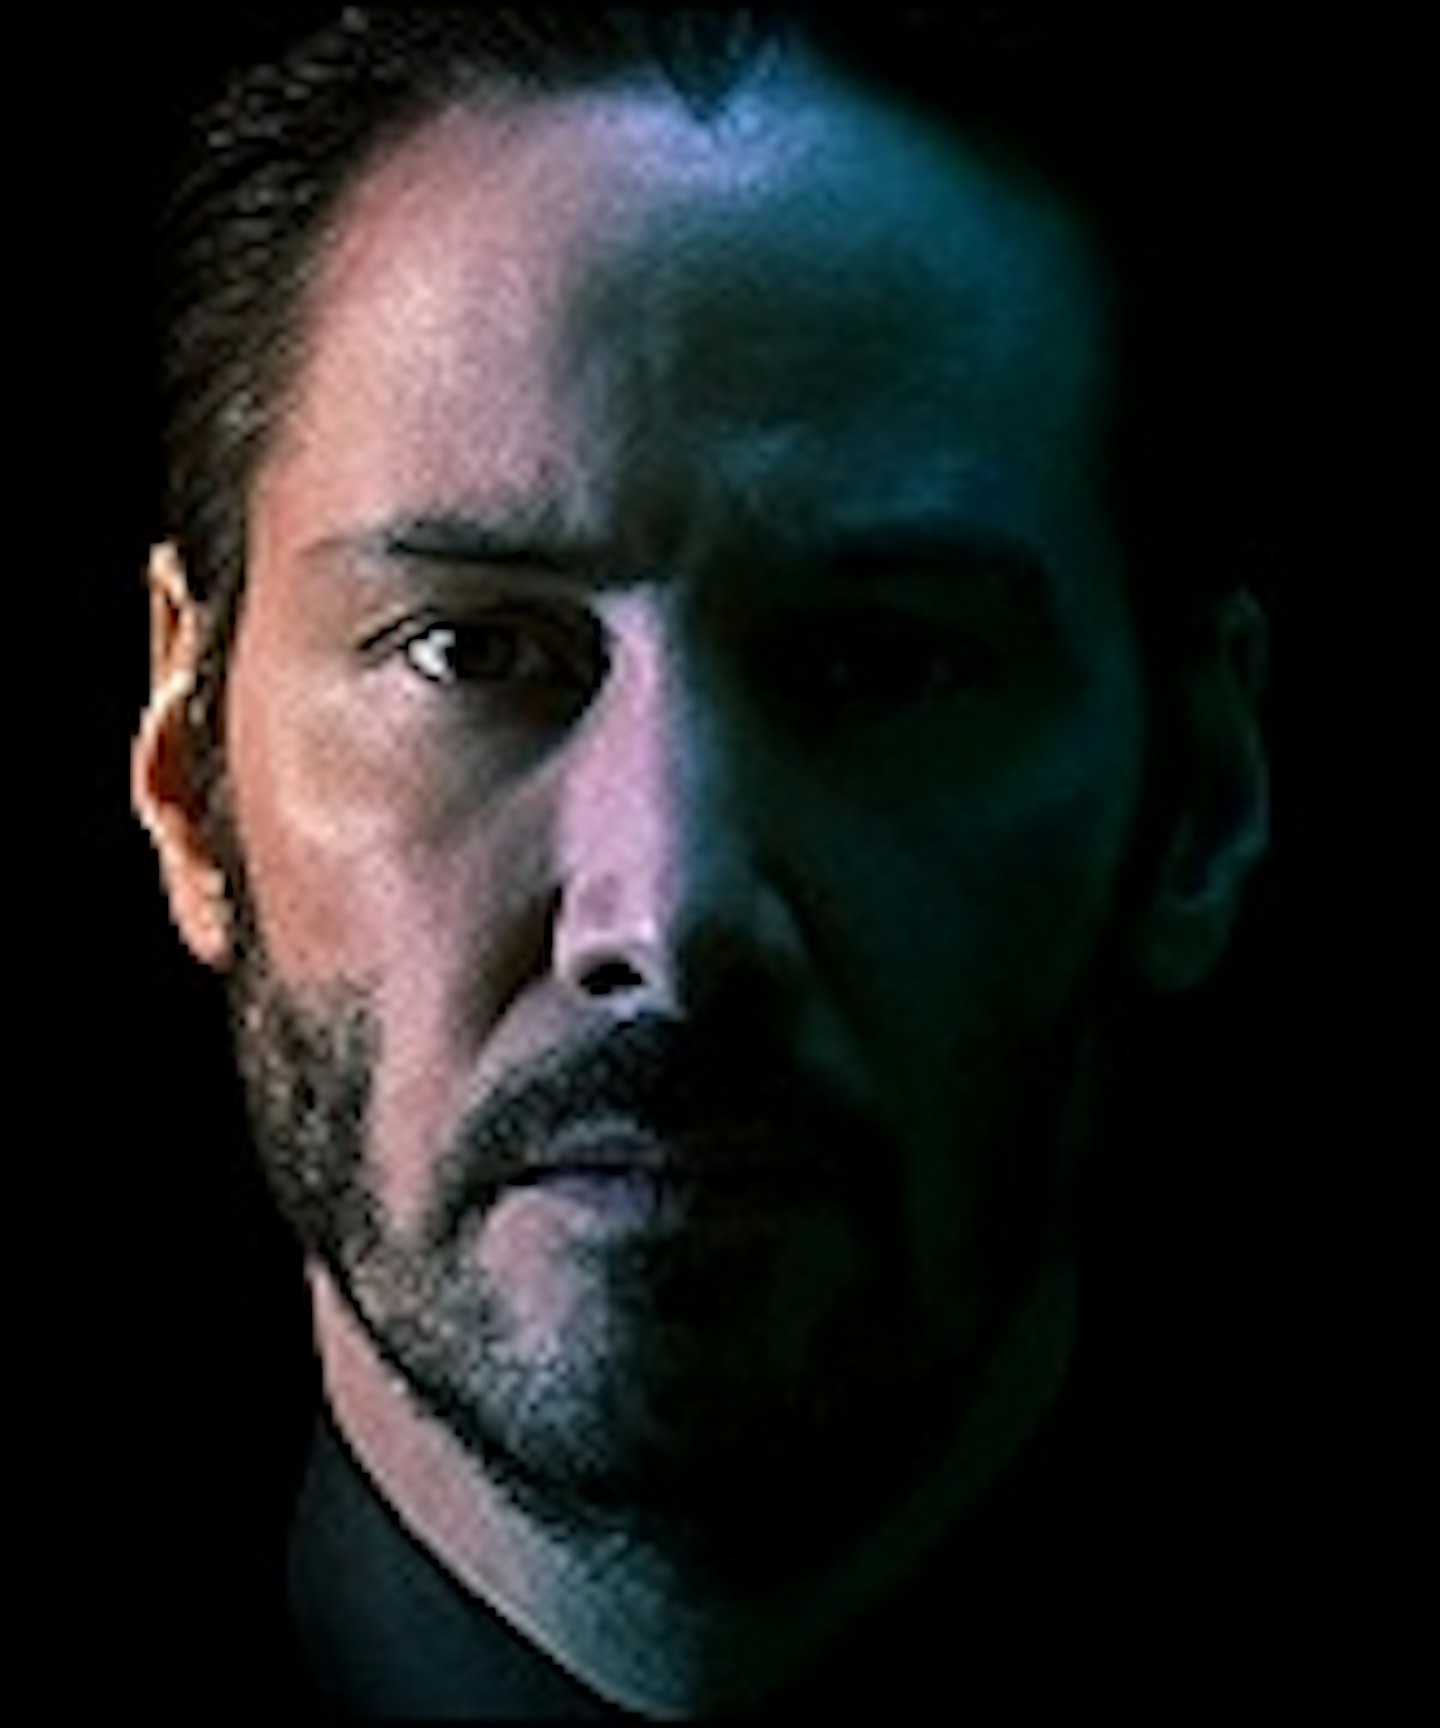 Keanu Reeves Has Time To Kill In The John Wick Trailer